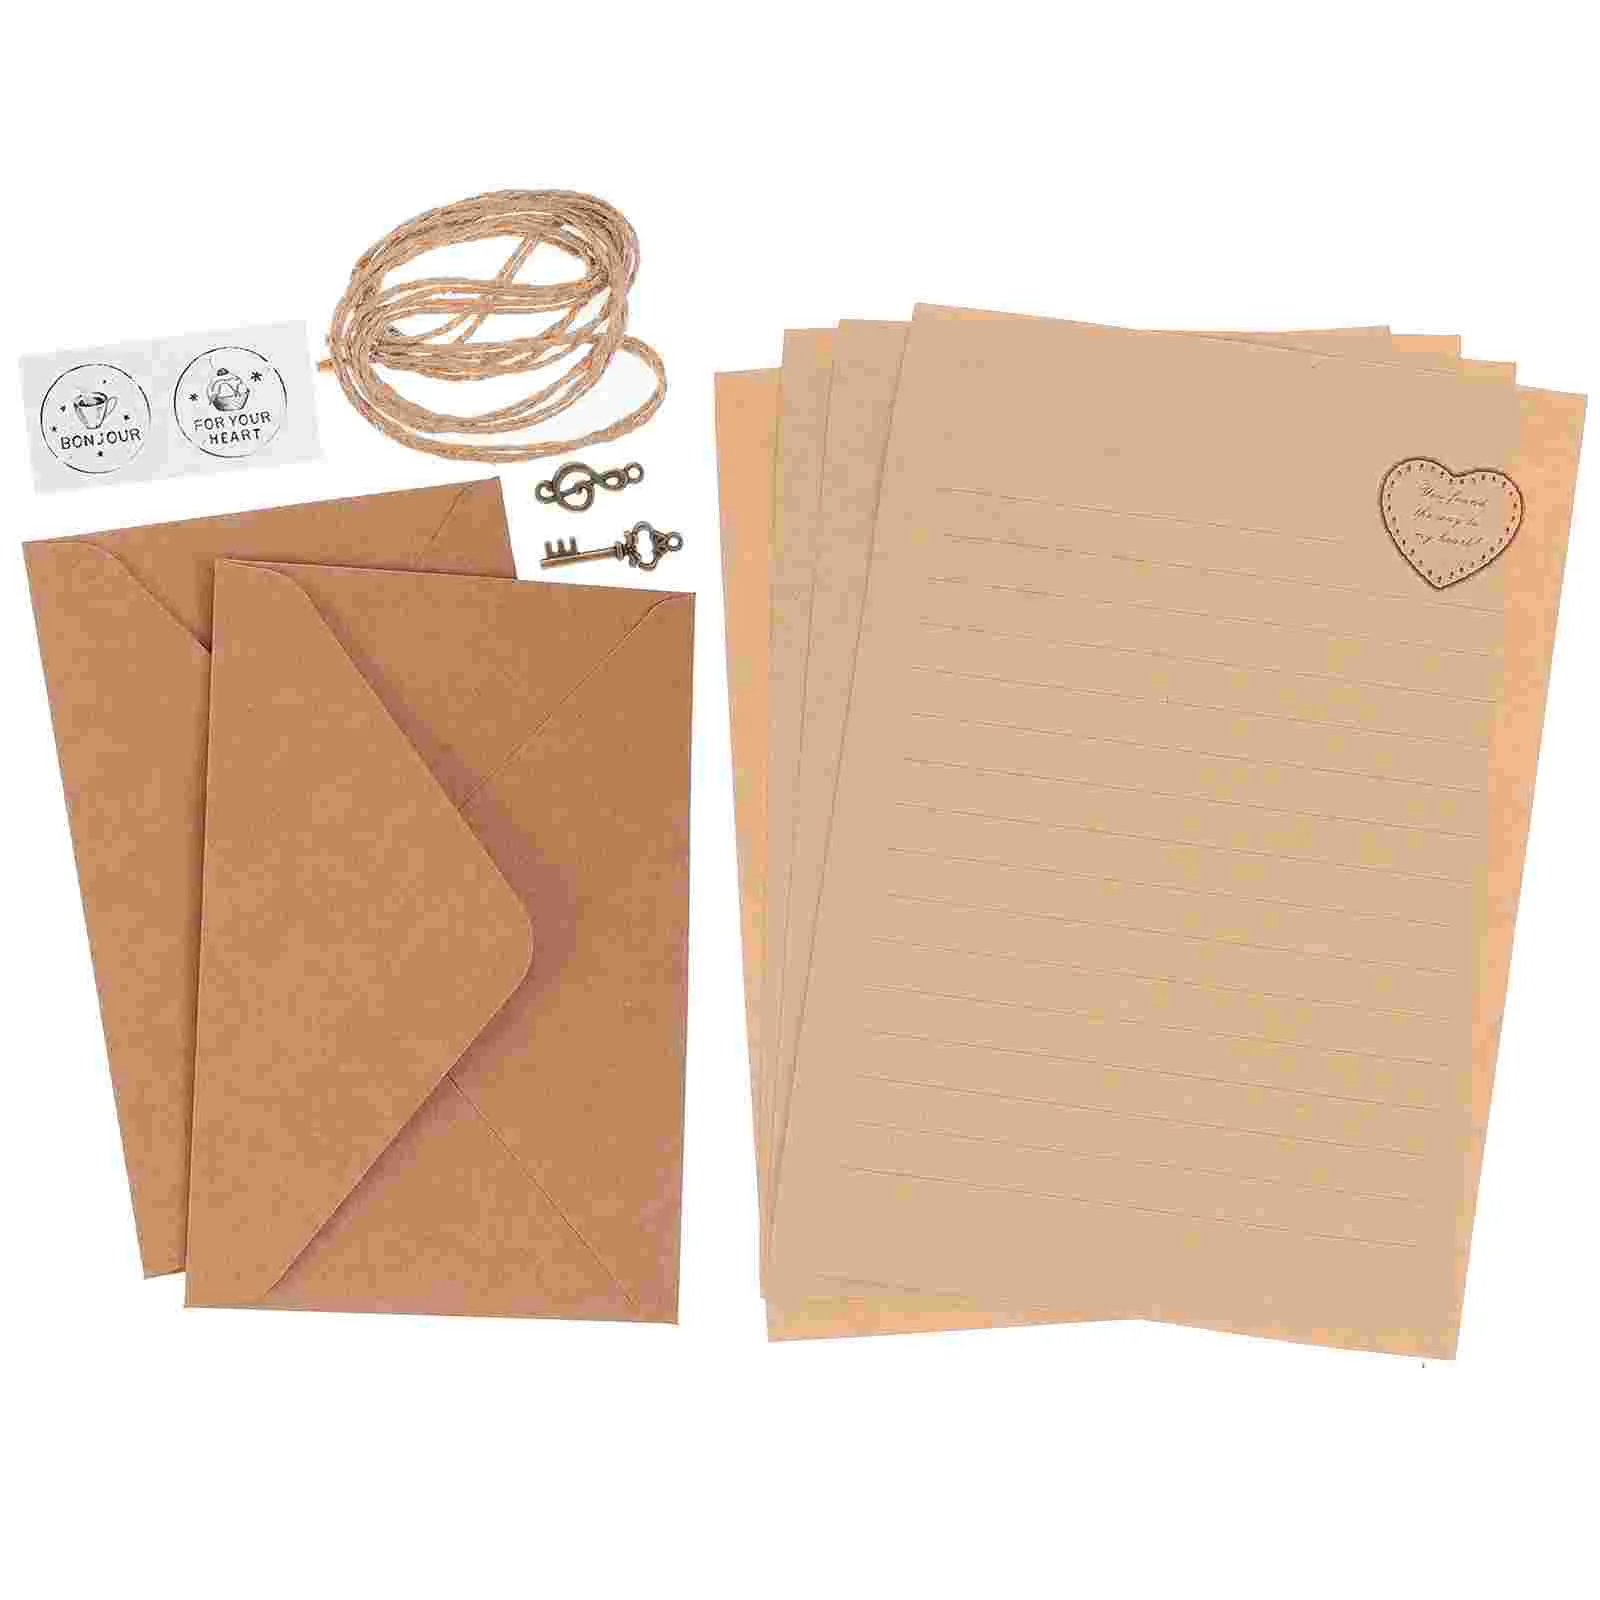 

2 Sets Traveler's Notebook Insert Page Envelop Letter Papers Blank Writing Stationery Envelope Invitation Packing Student